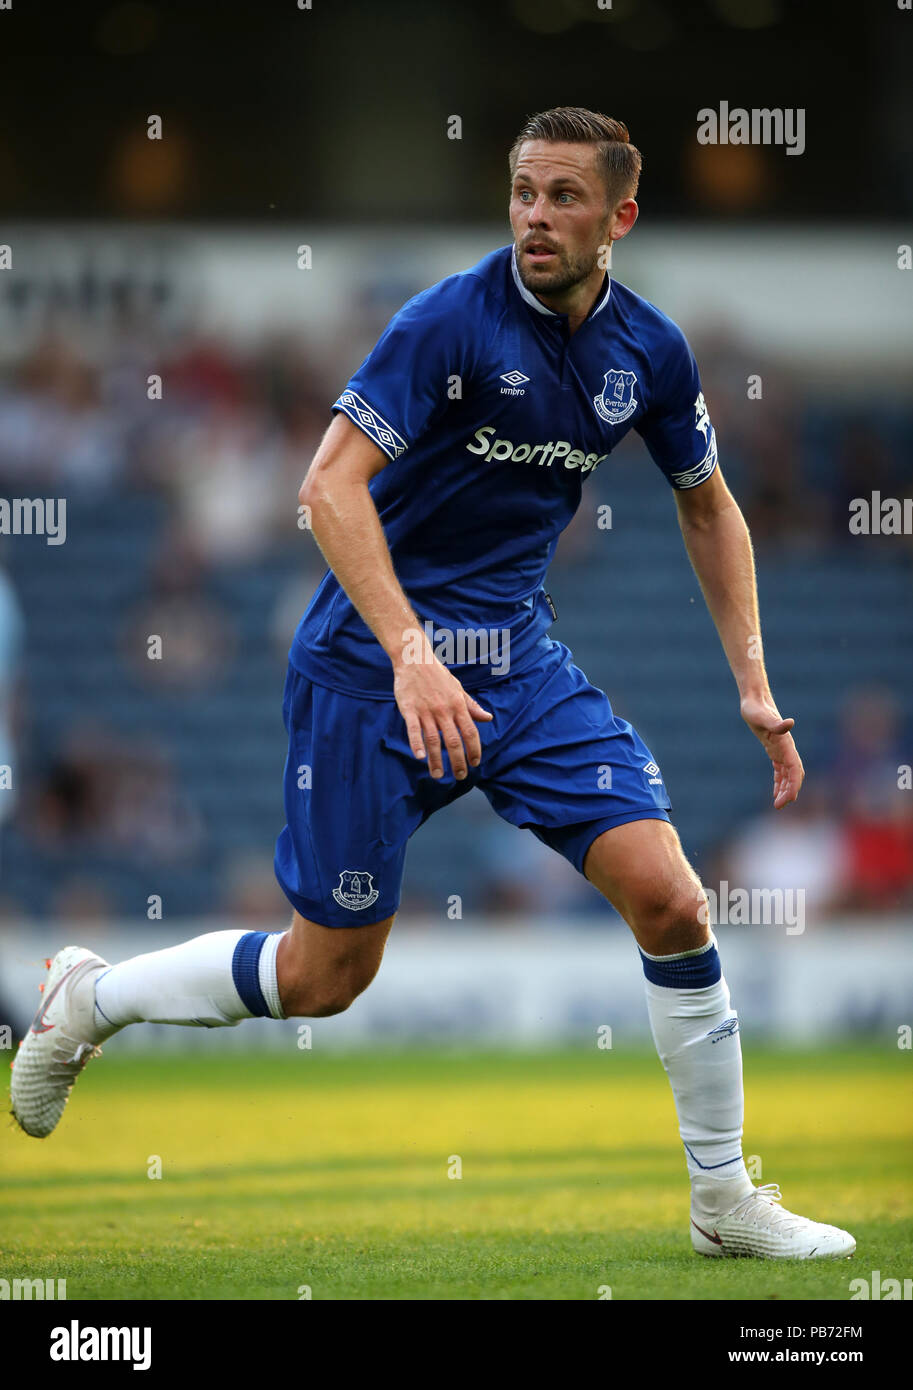 Everton's Gylfi Sigurosson during a pre-season friendly match at Ewood Park, Blackburn. PRESS ASSOCIATION Photo. Picture date: Thursday July 26, 2018. Photo credit should read: Nick Potts/PA Wire. EDITORIAL USE ONLY No use with unauthorised audio, video, data, fixture lists, club/league logos or 'live' services. Online in-match use limited to 75 images, no video emulation. No use in betting, games or single club/league/player publications. Stock Photo